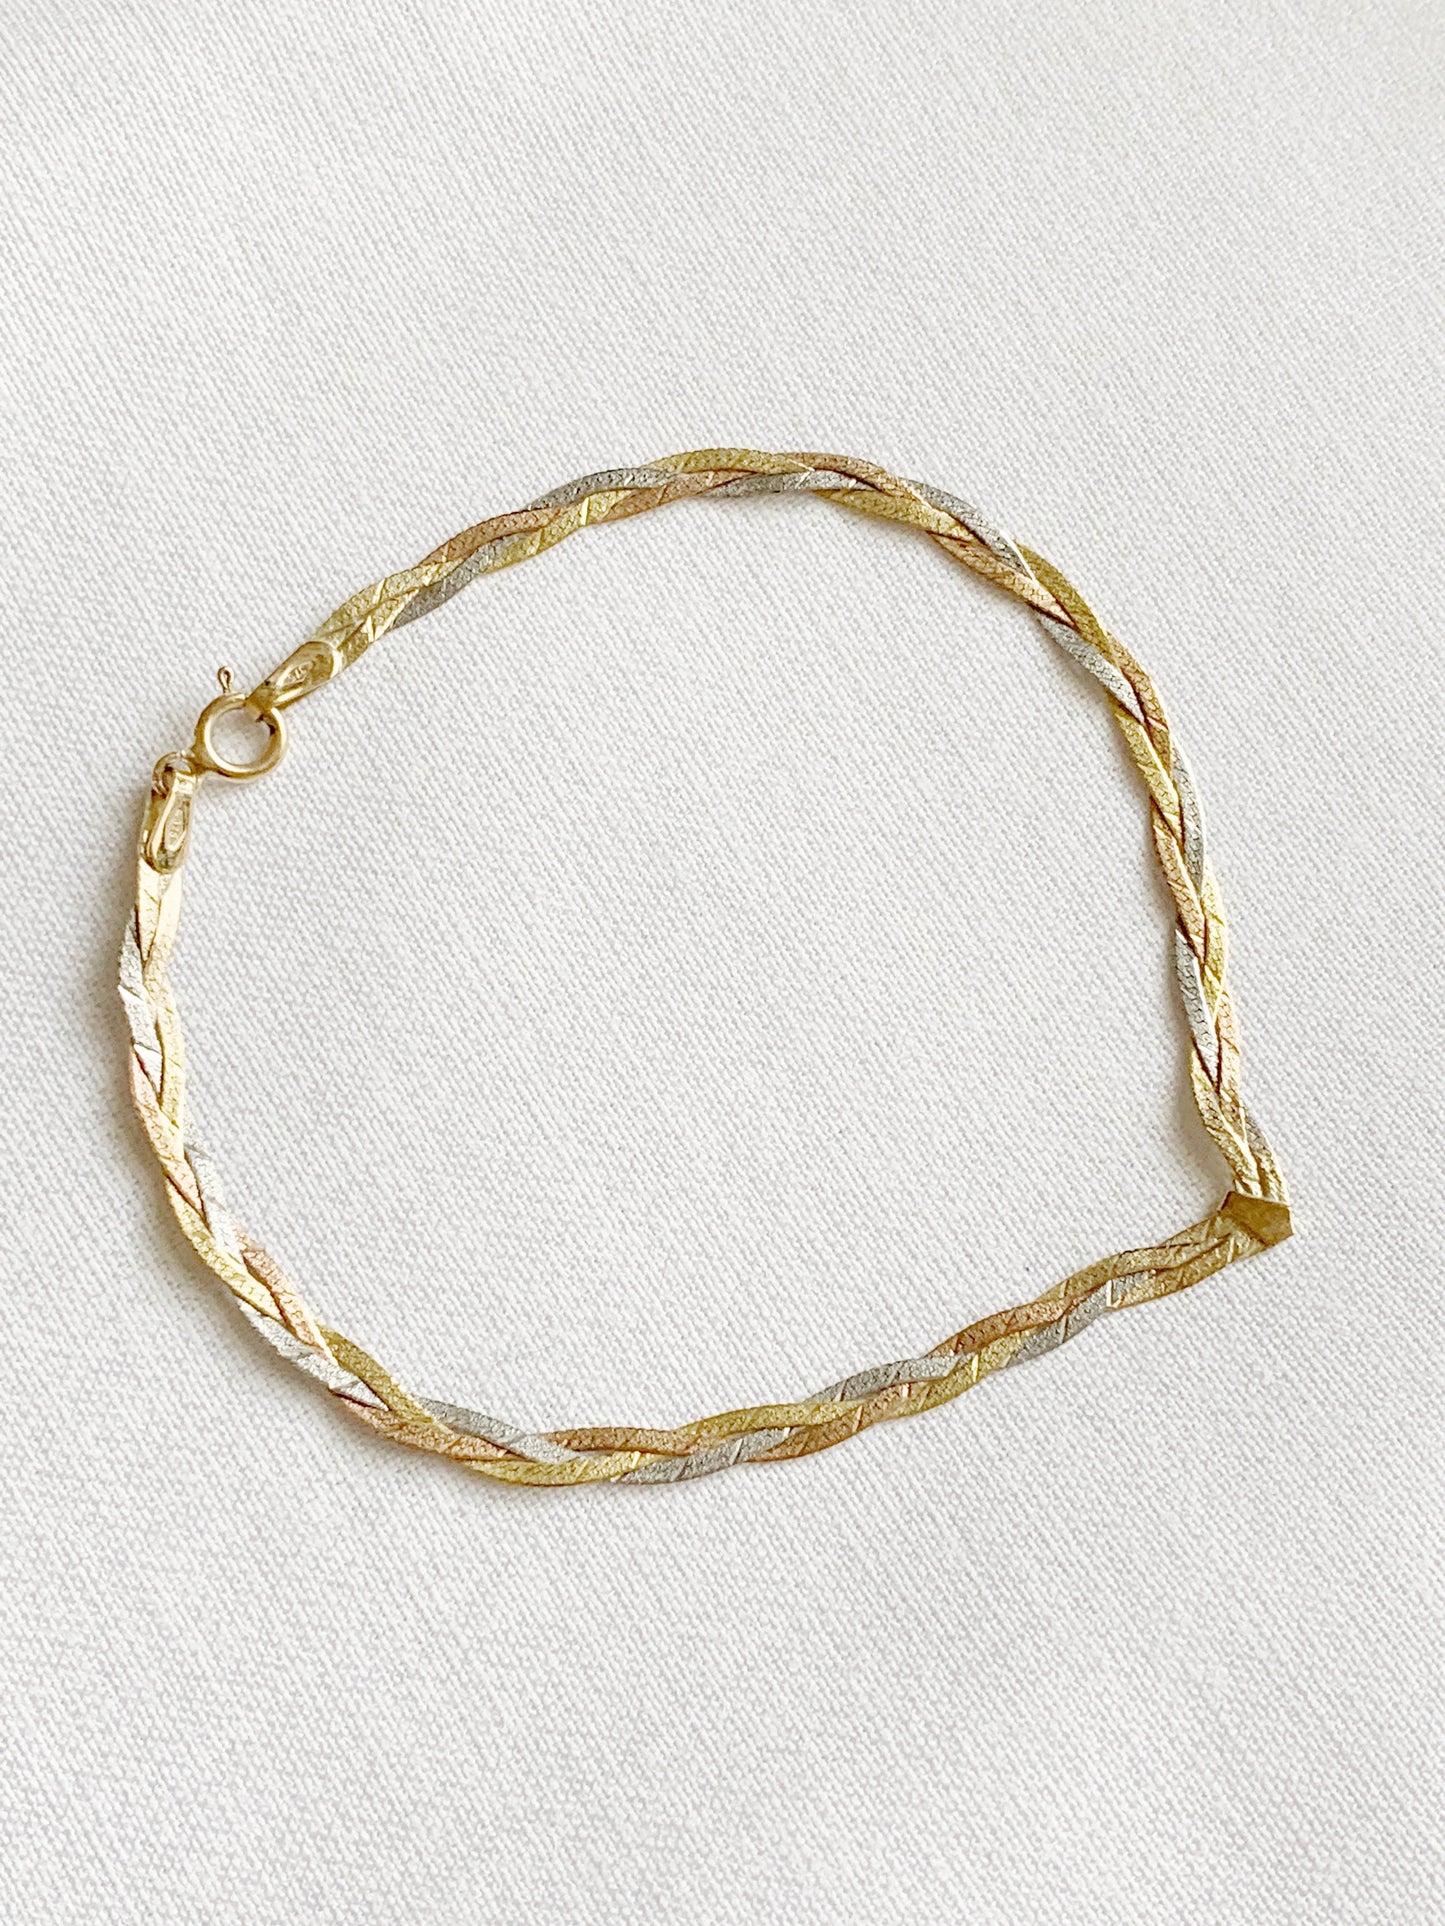 Vintage 9ct Gold Mixed Metal Braided Chain V Bracelet